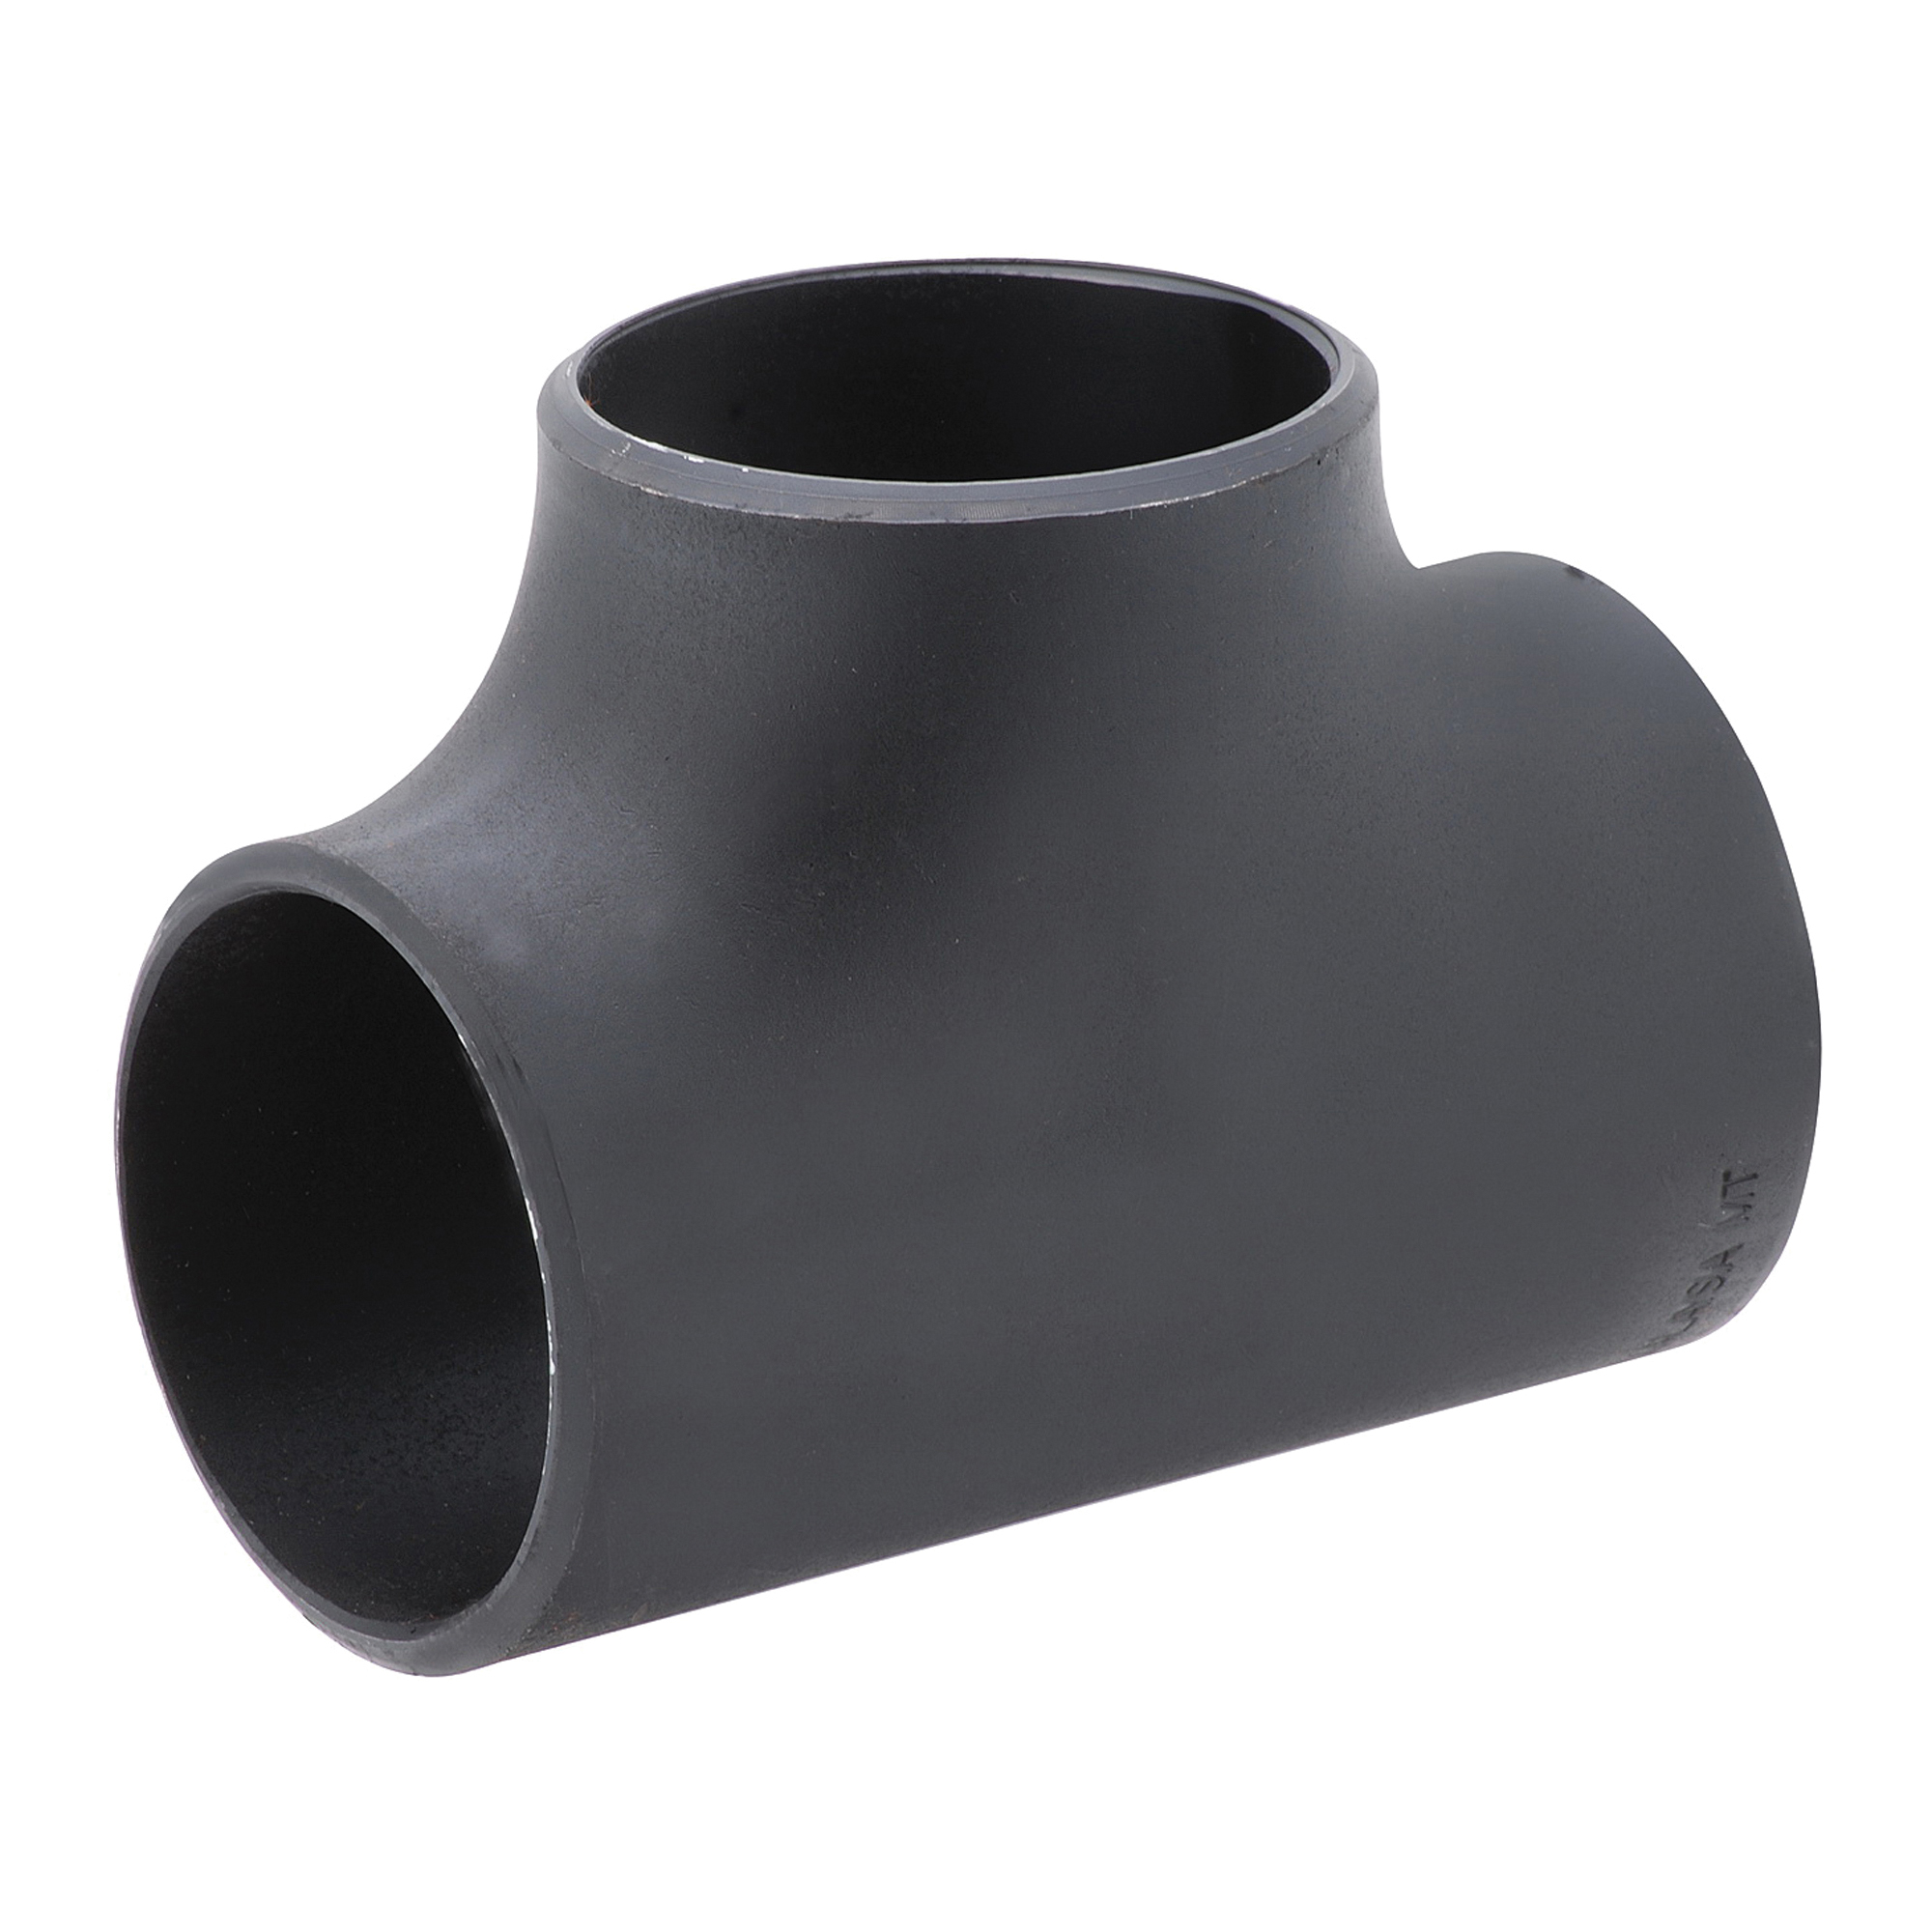 Matco-Norca™ MNTXH04 Pipe Tee, 3/4 in, SCH 80/XH - Carbon Steel Pipe Fittings